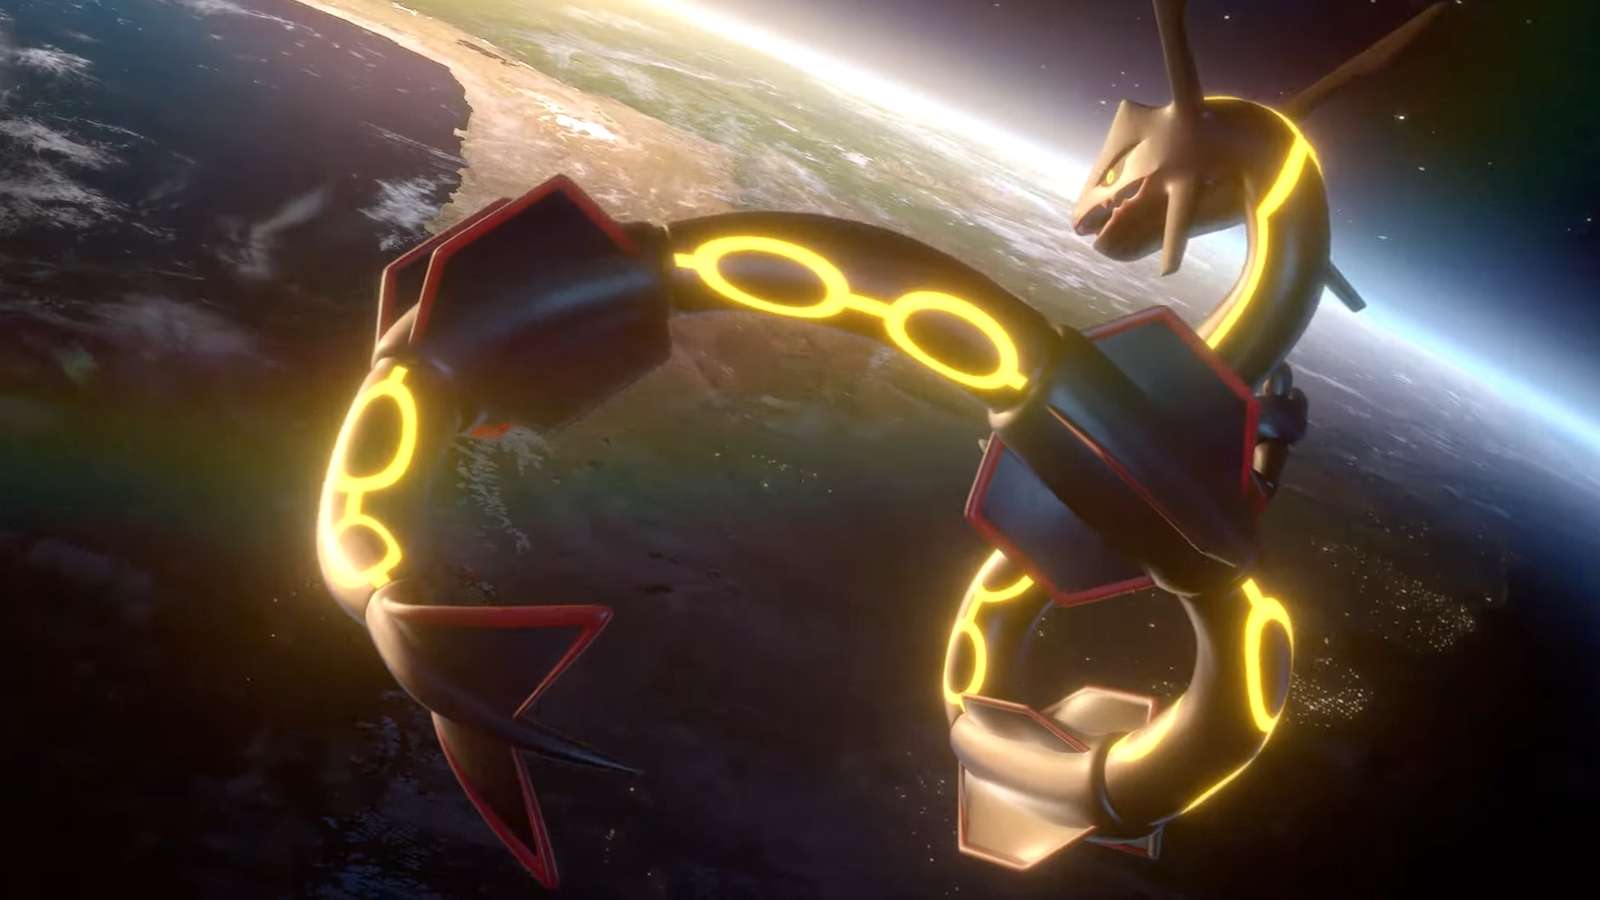 Legendary Pokemon Rayquaza about to descend from space.